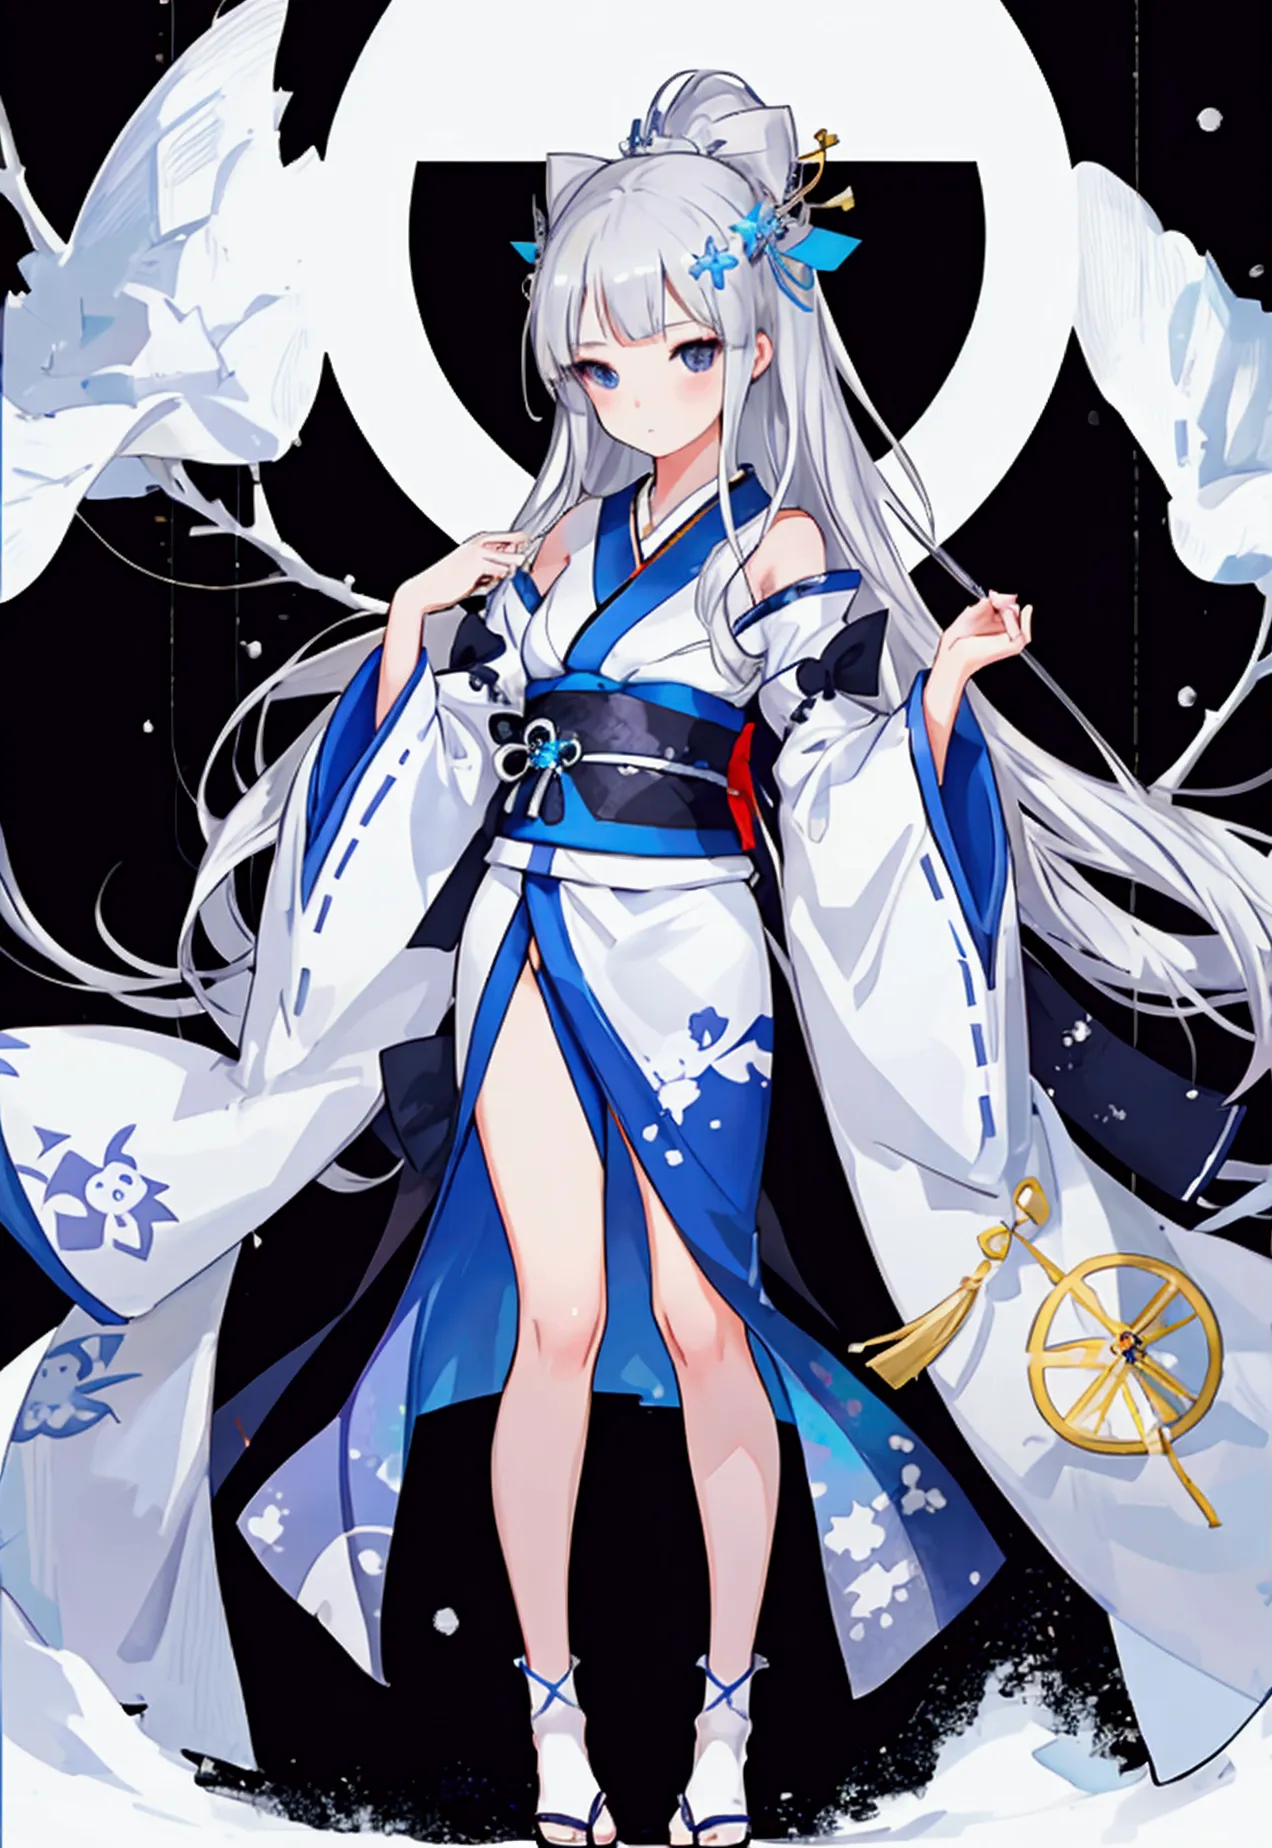 Cute snow woman girl, 16 years old, Silver hair side tail, His shoulders are bare., black eye, White and blue kimono, Thin legs,...